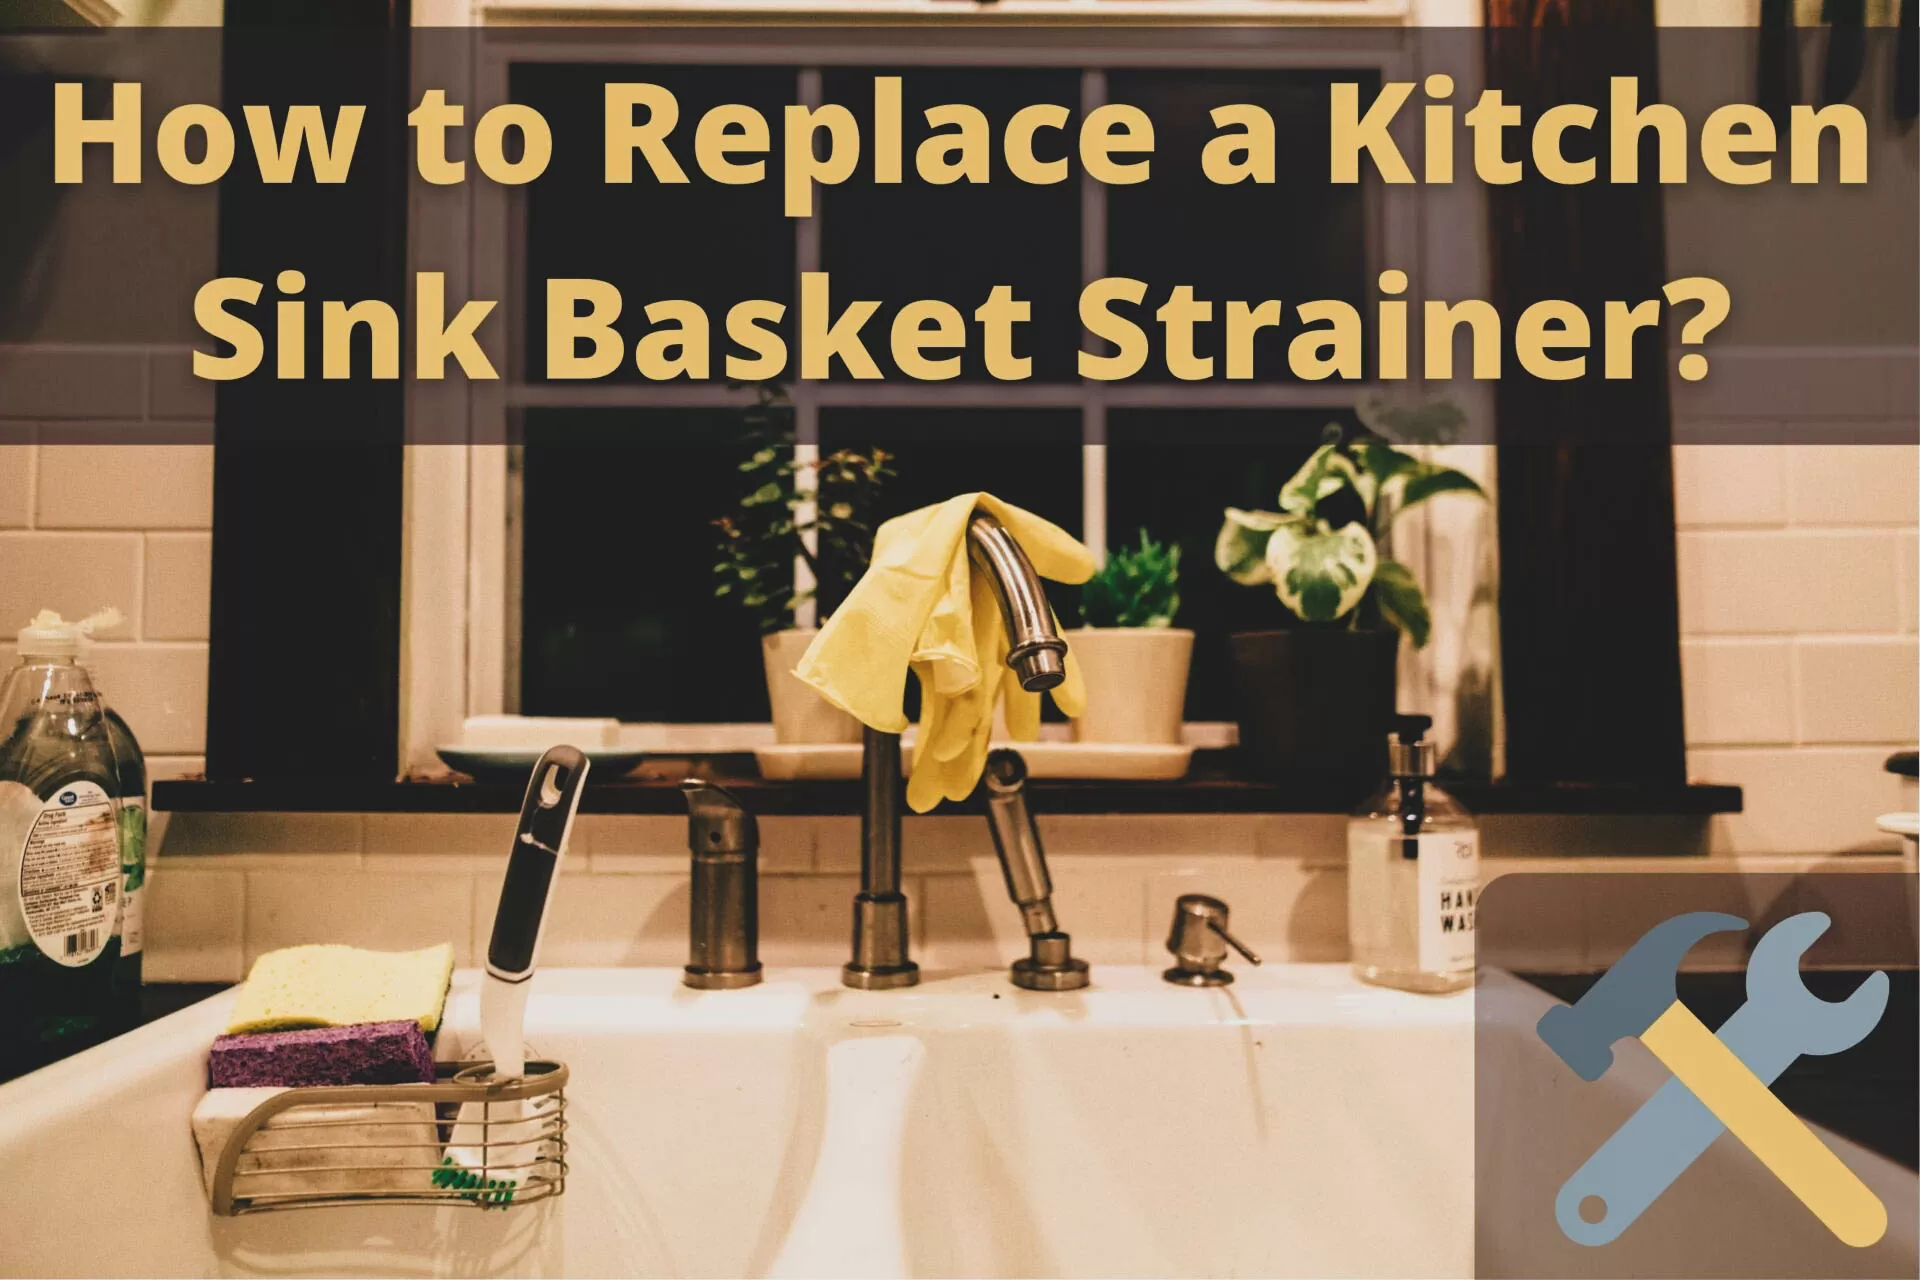 make kitchen sink basket out of wire hangers